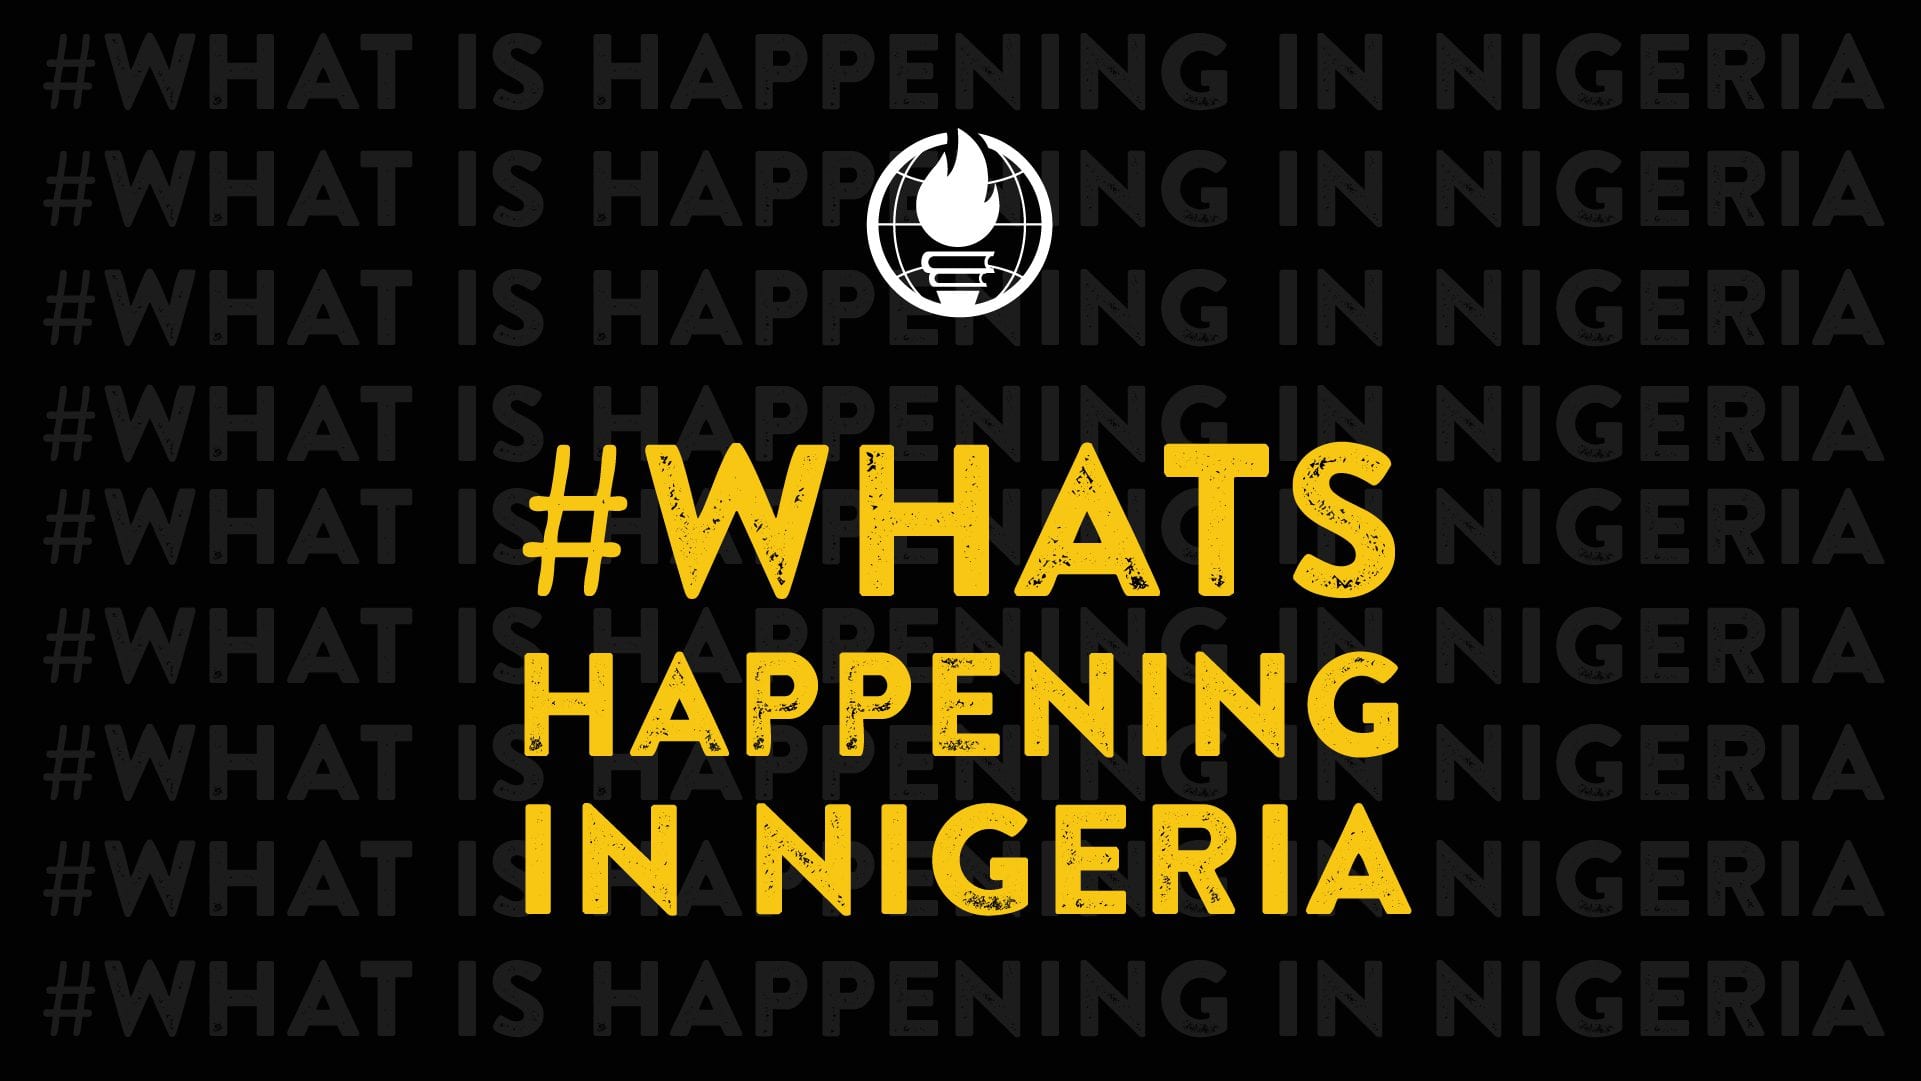 In October 2020, people took to the streets across Nigeria as part of the #EndSars protest movement, demanding an end to police brutality.